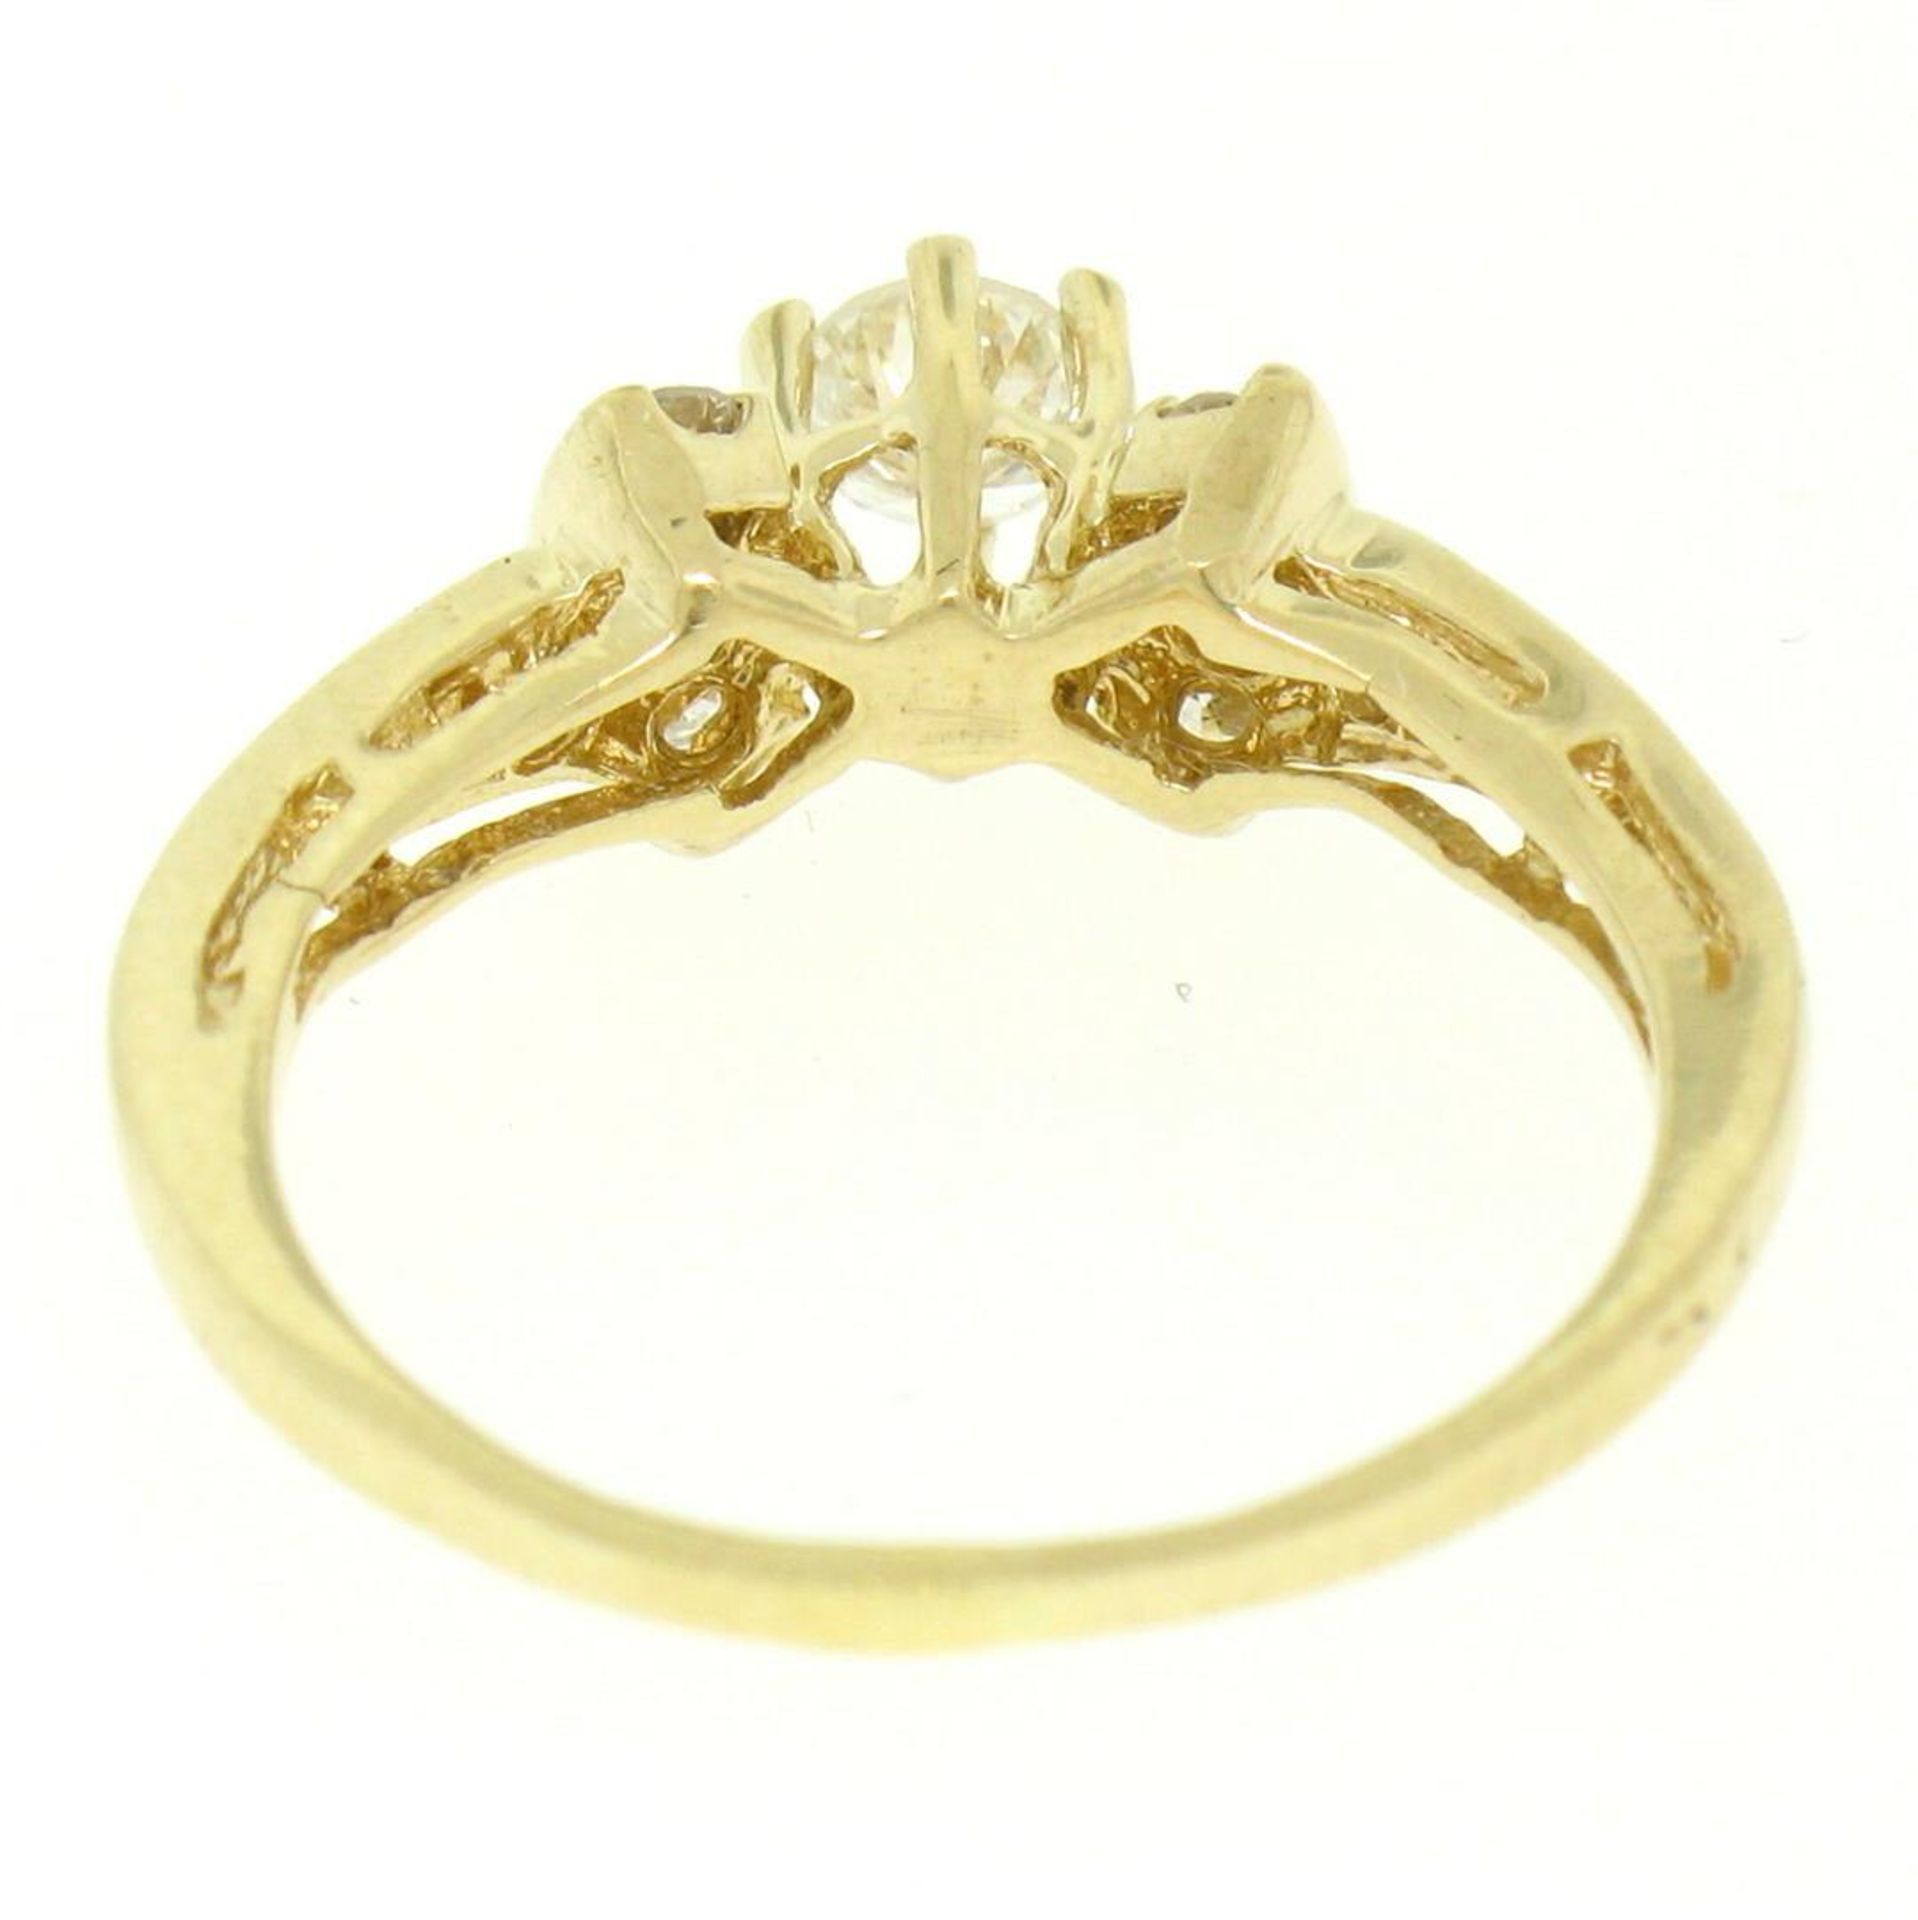 14k Yellow Gold Petite 0.42 ctw Round Diamond Engagement Ring w/ Channel Accents - Image 3 of 8